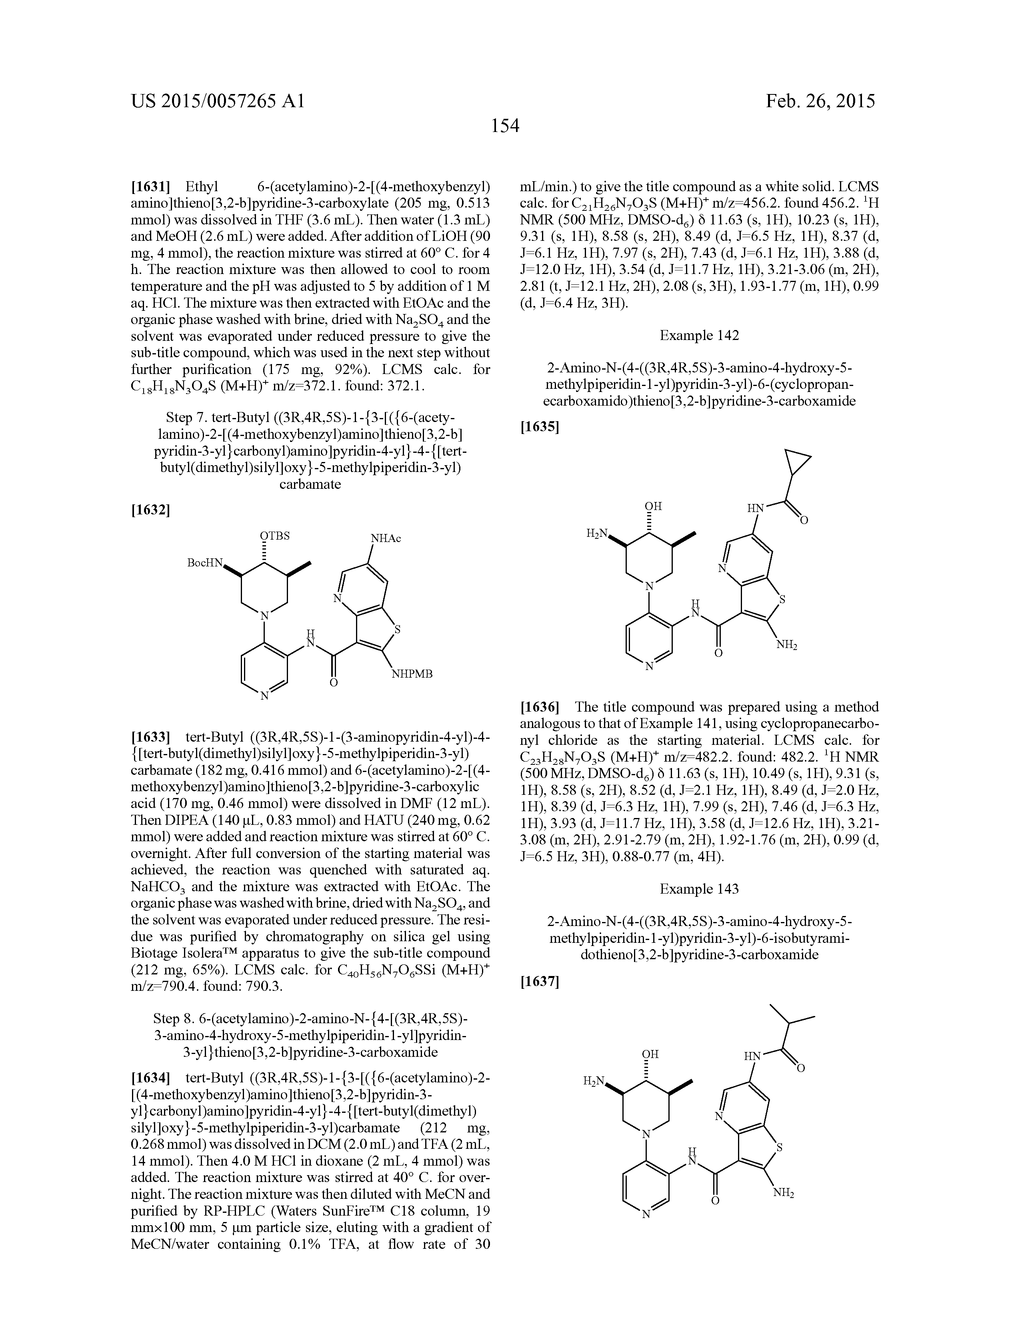 FURO- AND THIENO-PYRIDINE CARBOXAMIDE COMPOUNDS USEFUL AS PIM KINASE     INHIBITORS - diagram, schematic, and image 155